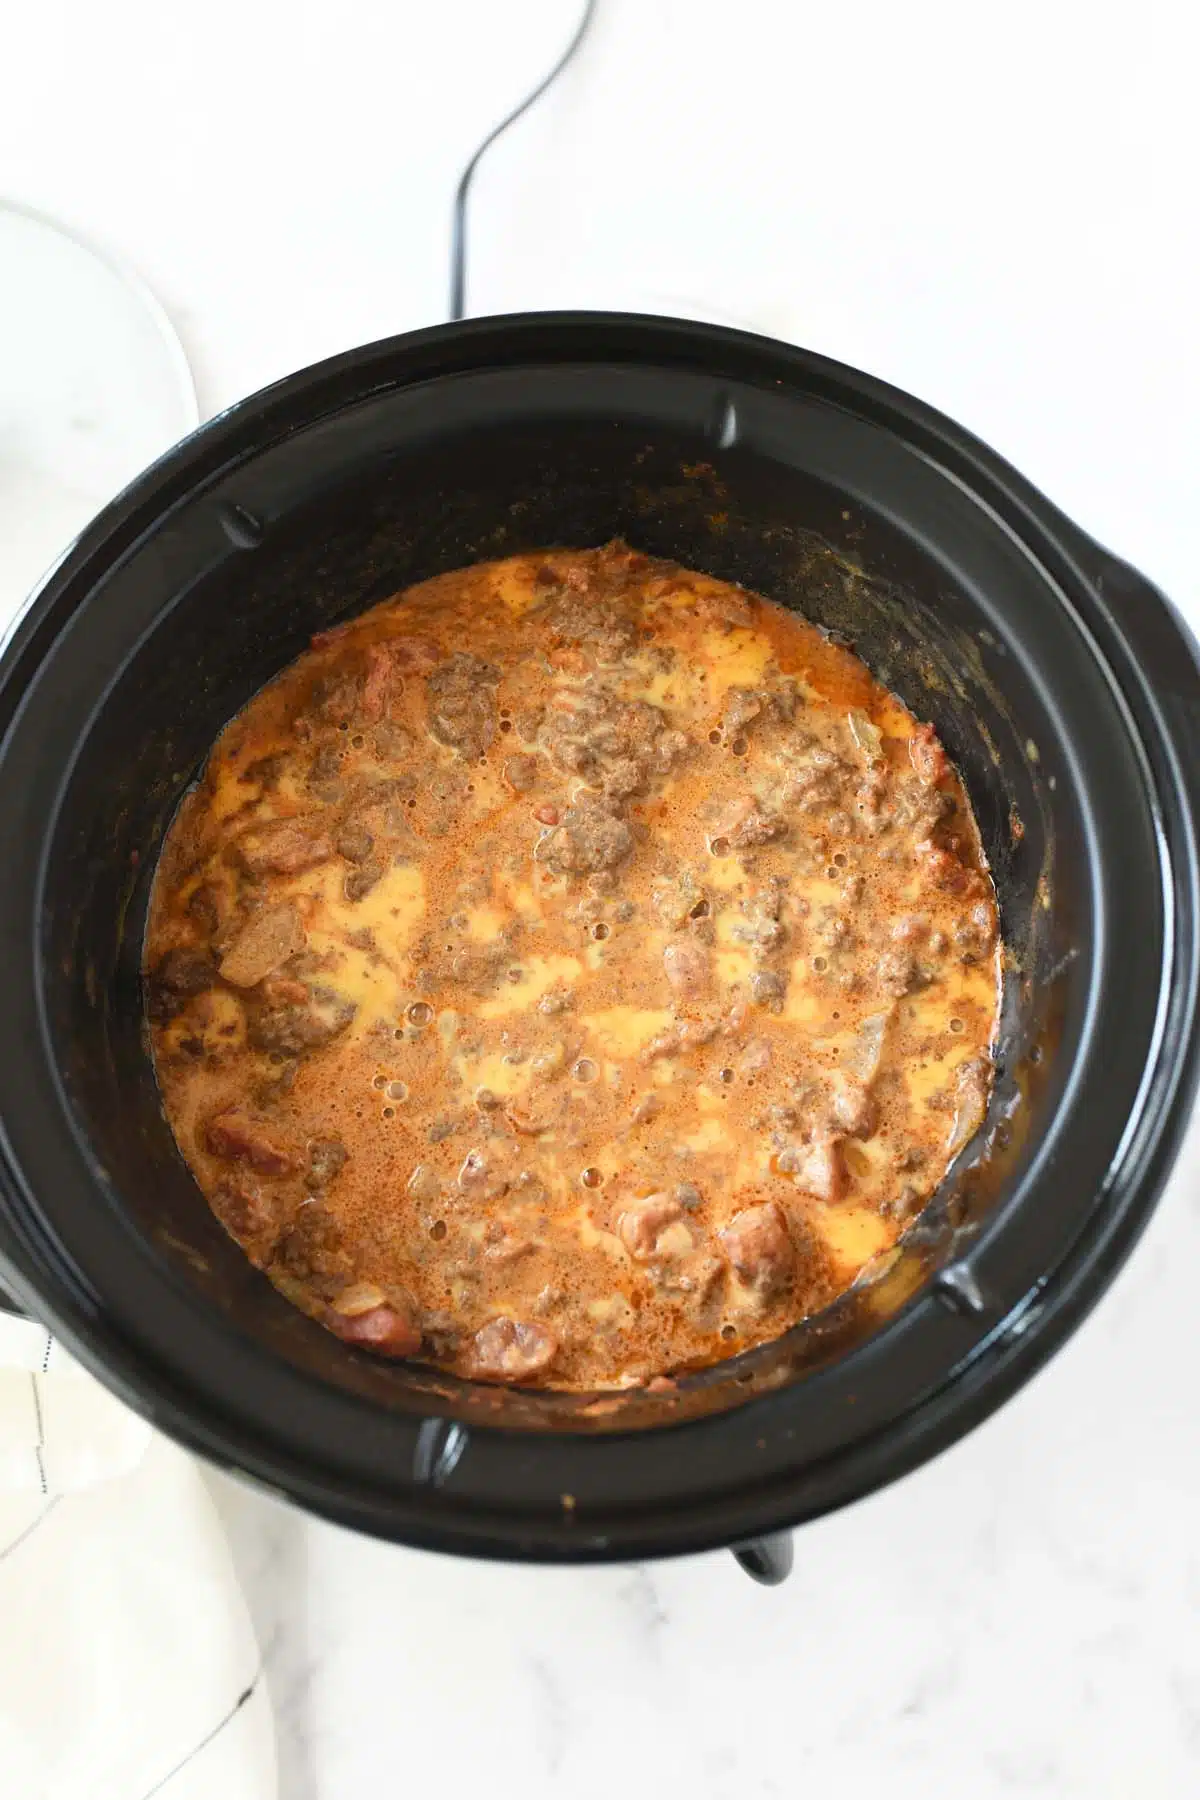 Slow cooked taco dip in a black slow cooker.